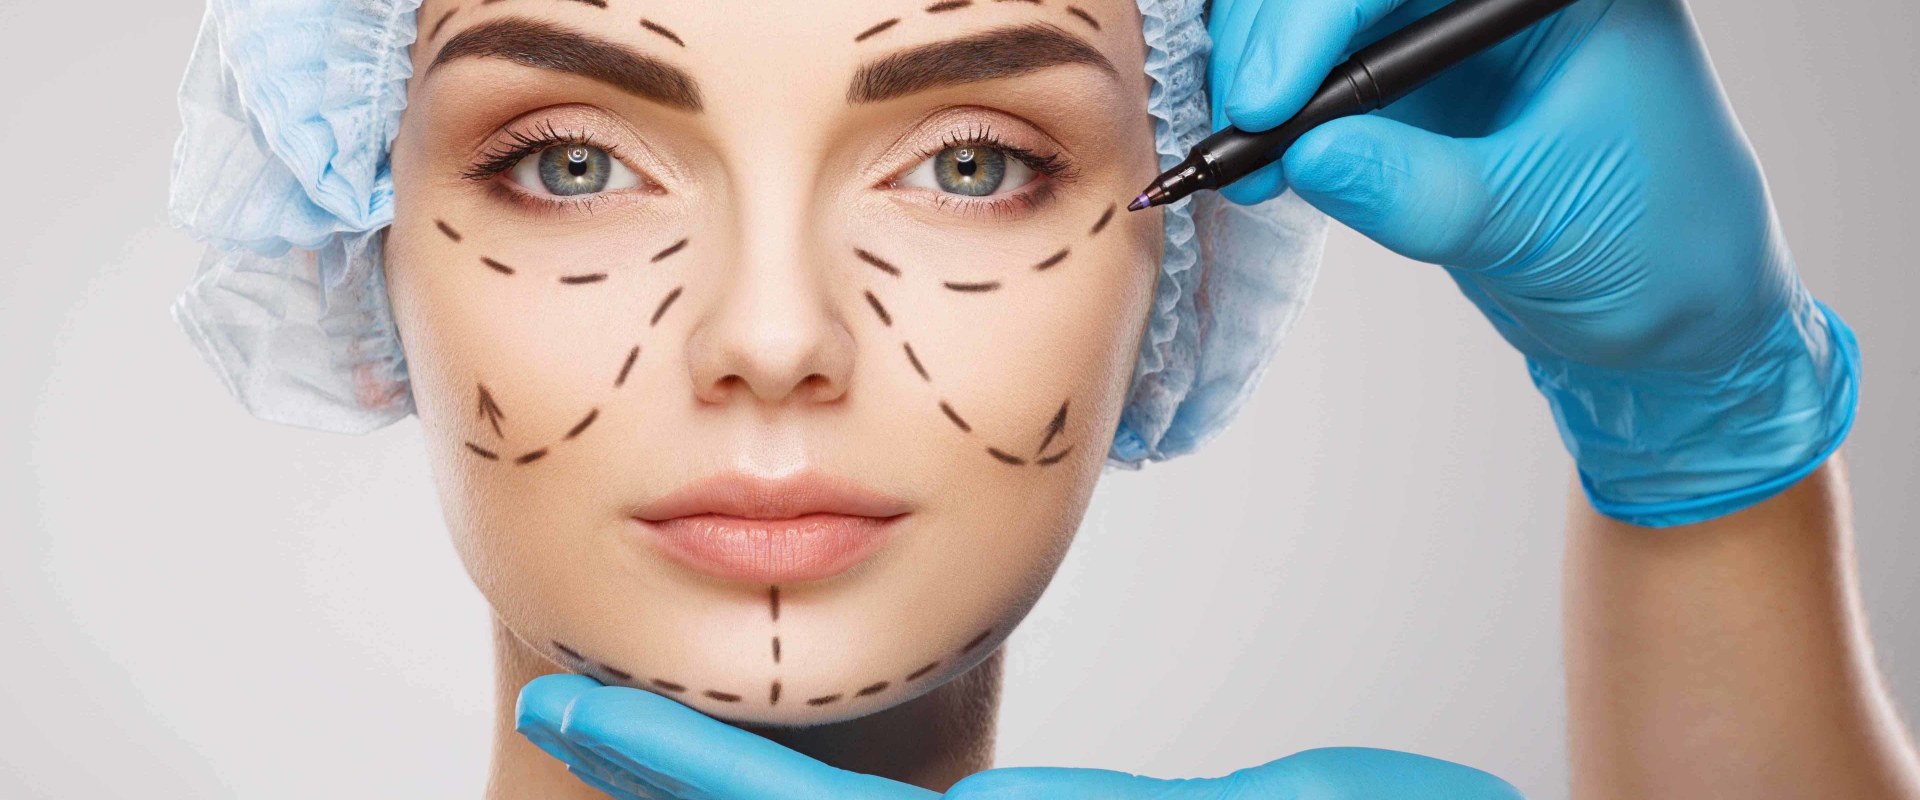 Who is Not a Good Candidate for Plastic Surgery?